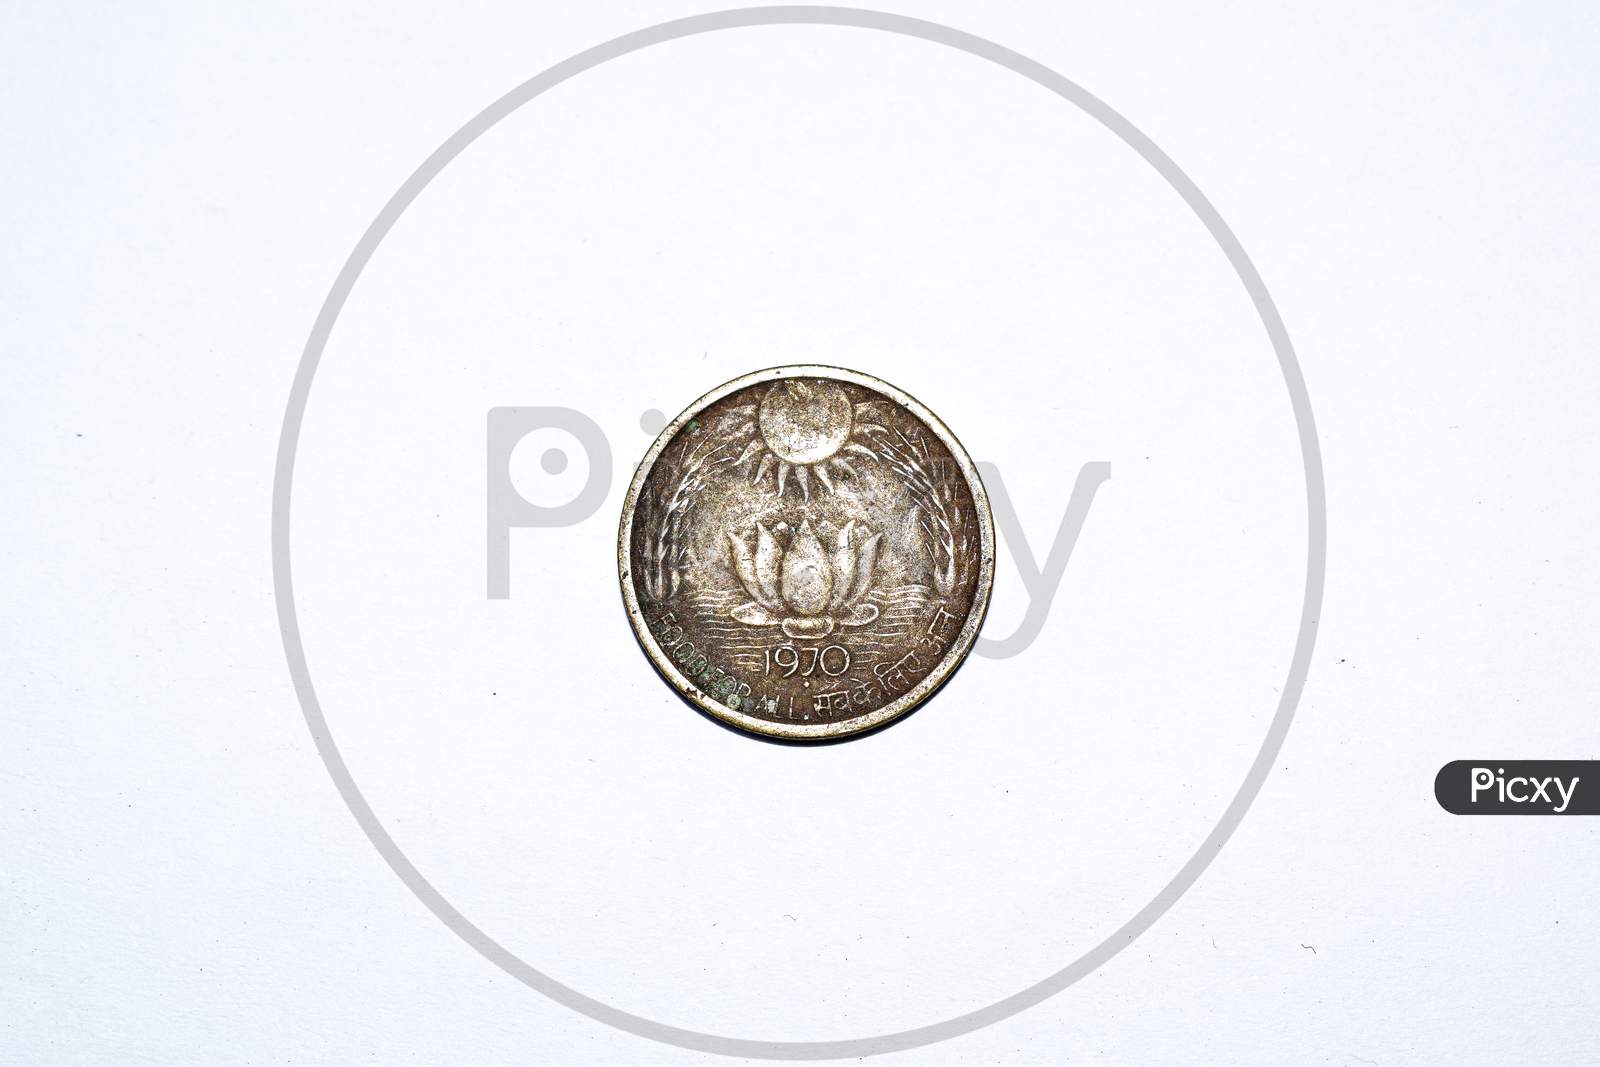 Back Side Of Old Indian 20 Paise Coin. Year 1970 Vintage Coin. White Background.